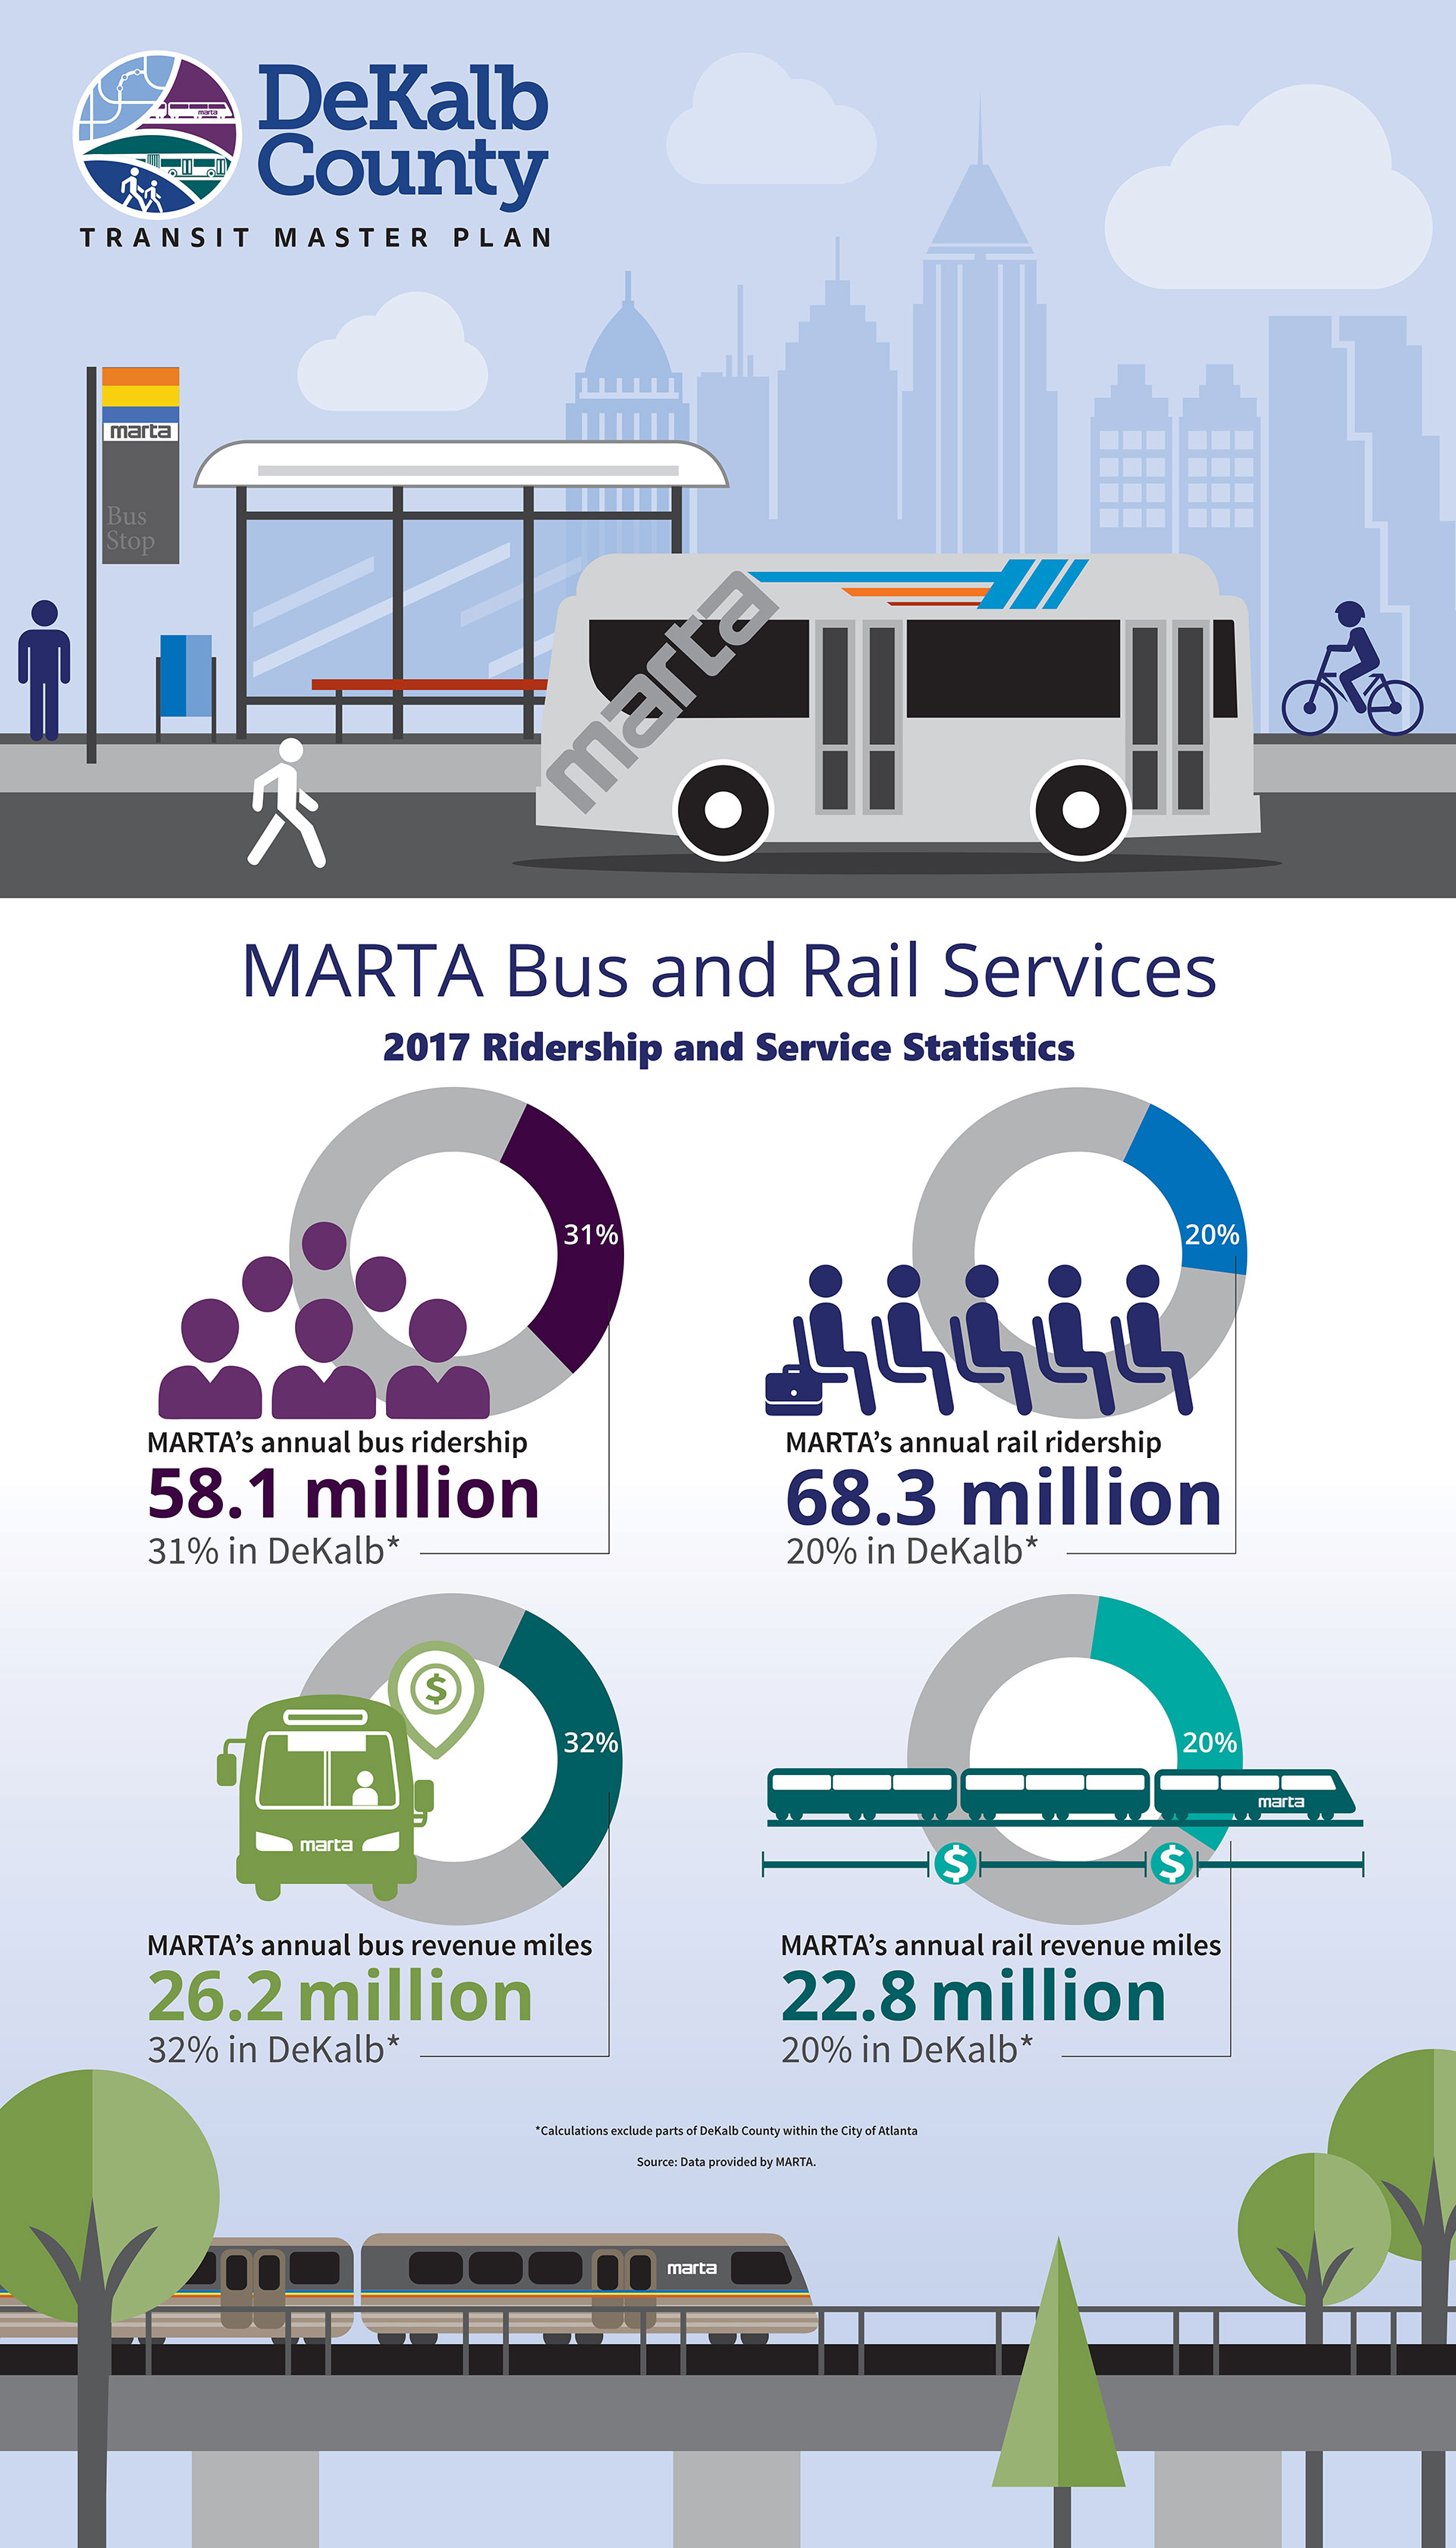 MARTA Bus and Rial Services